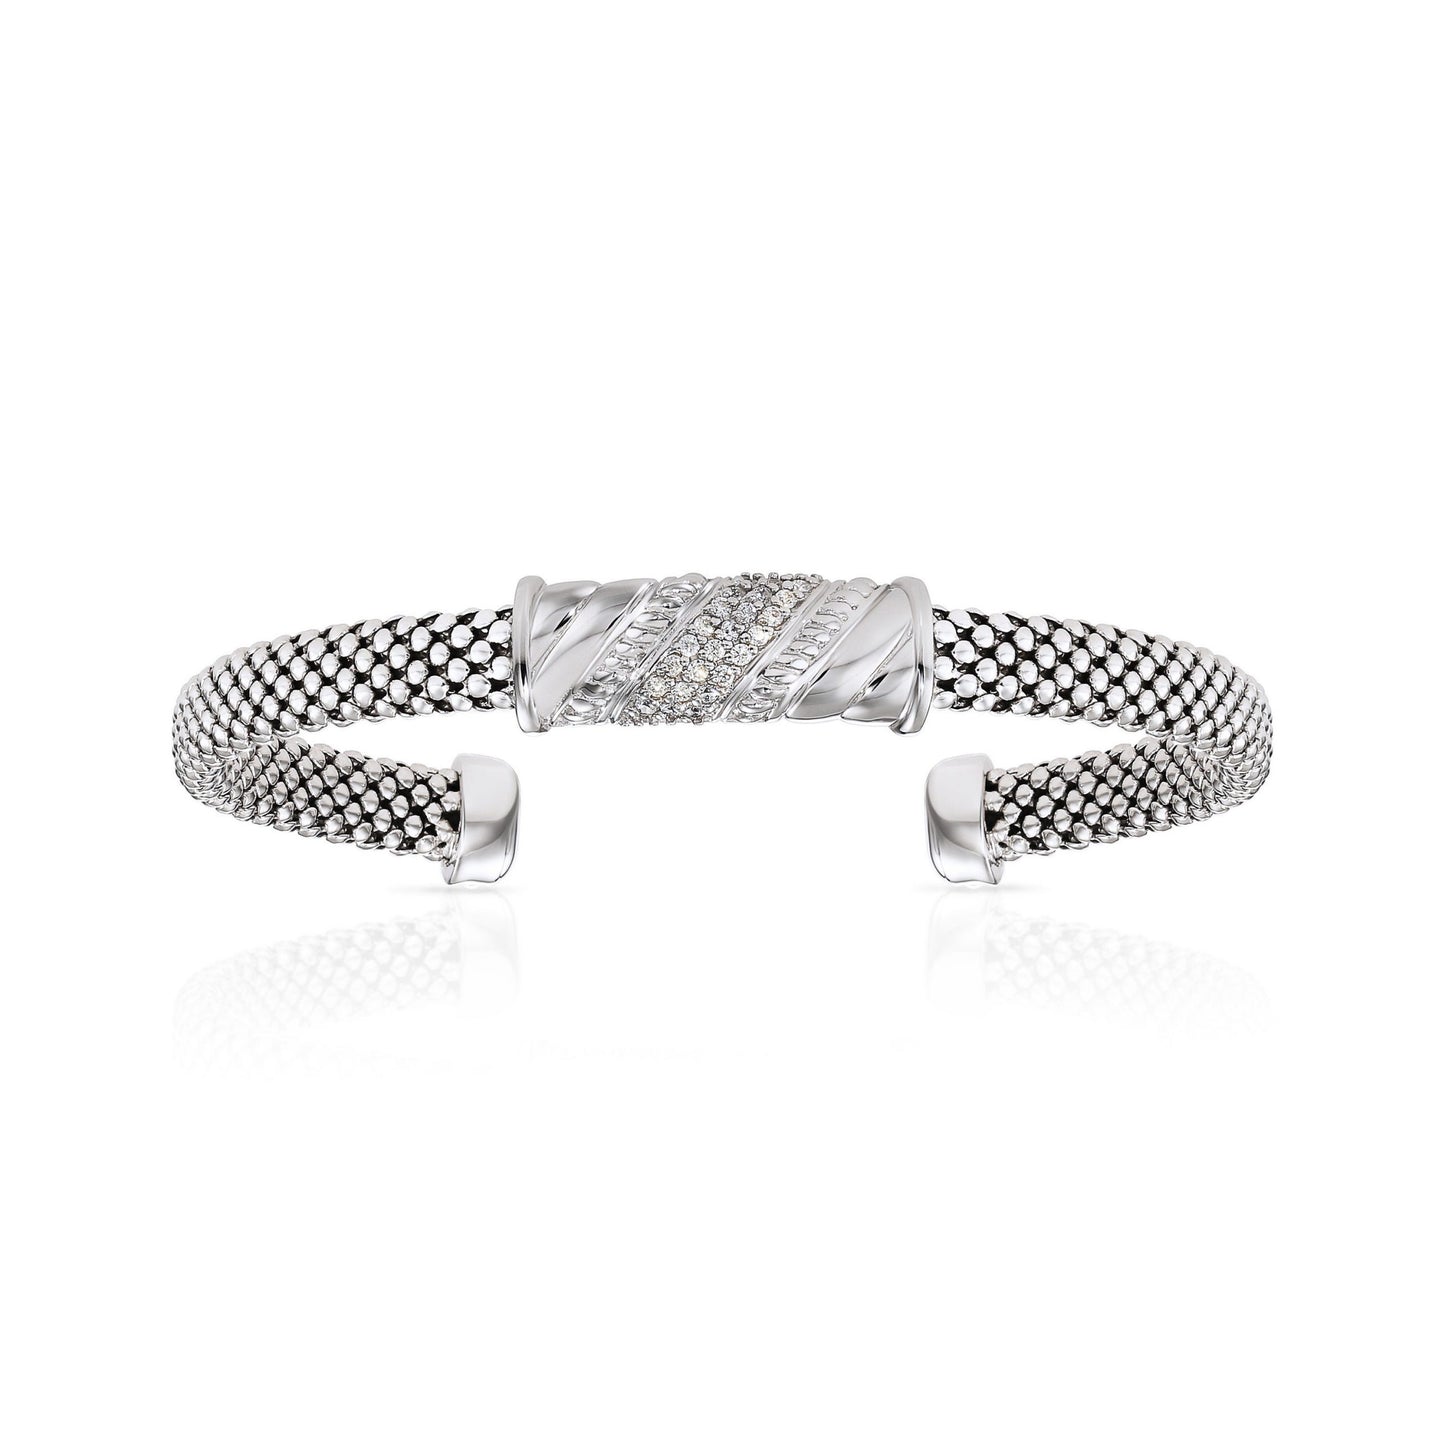 Italian Bar Cuff Bracelet in Sterling Silver, Royal Rectangle, Fits 7 and 8 inch wrist